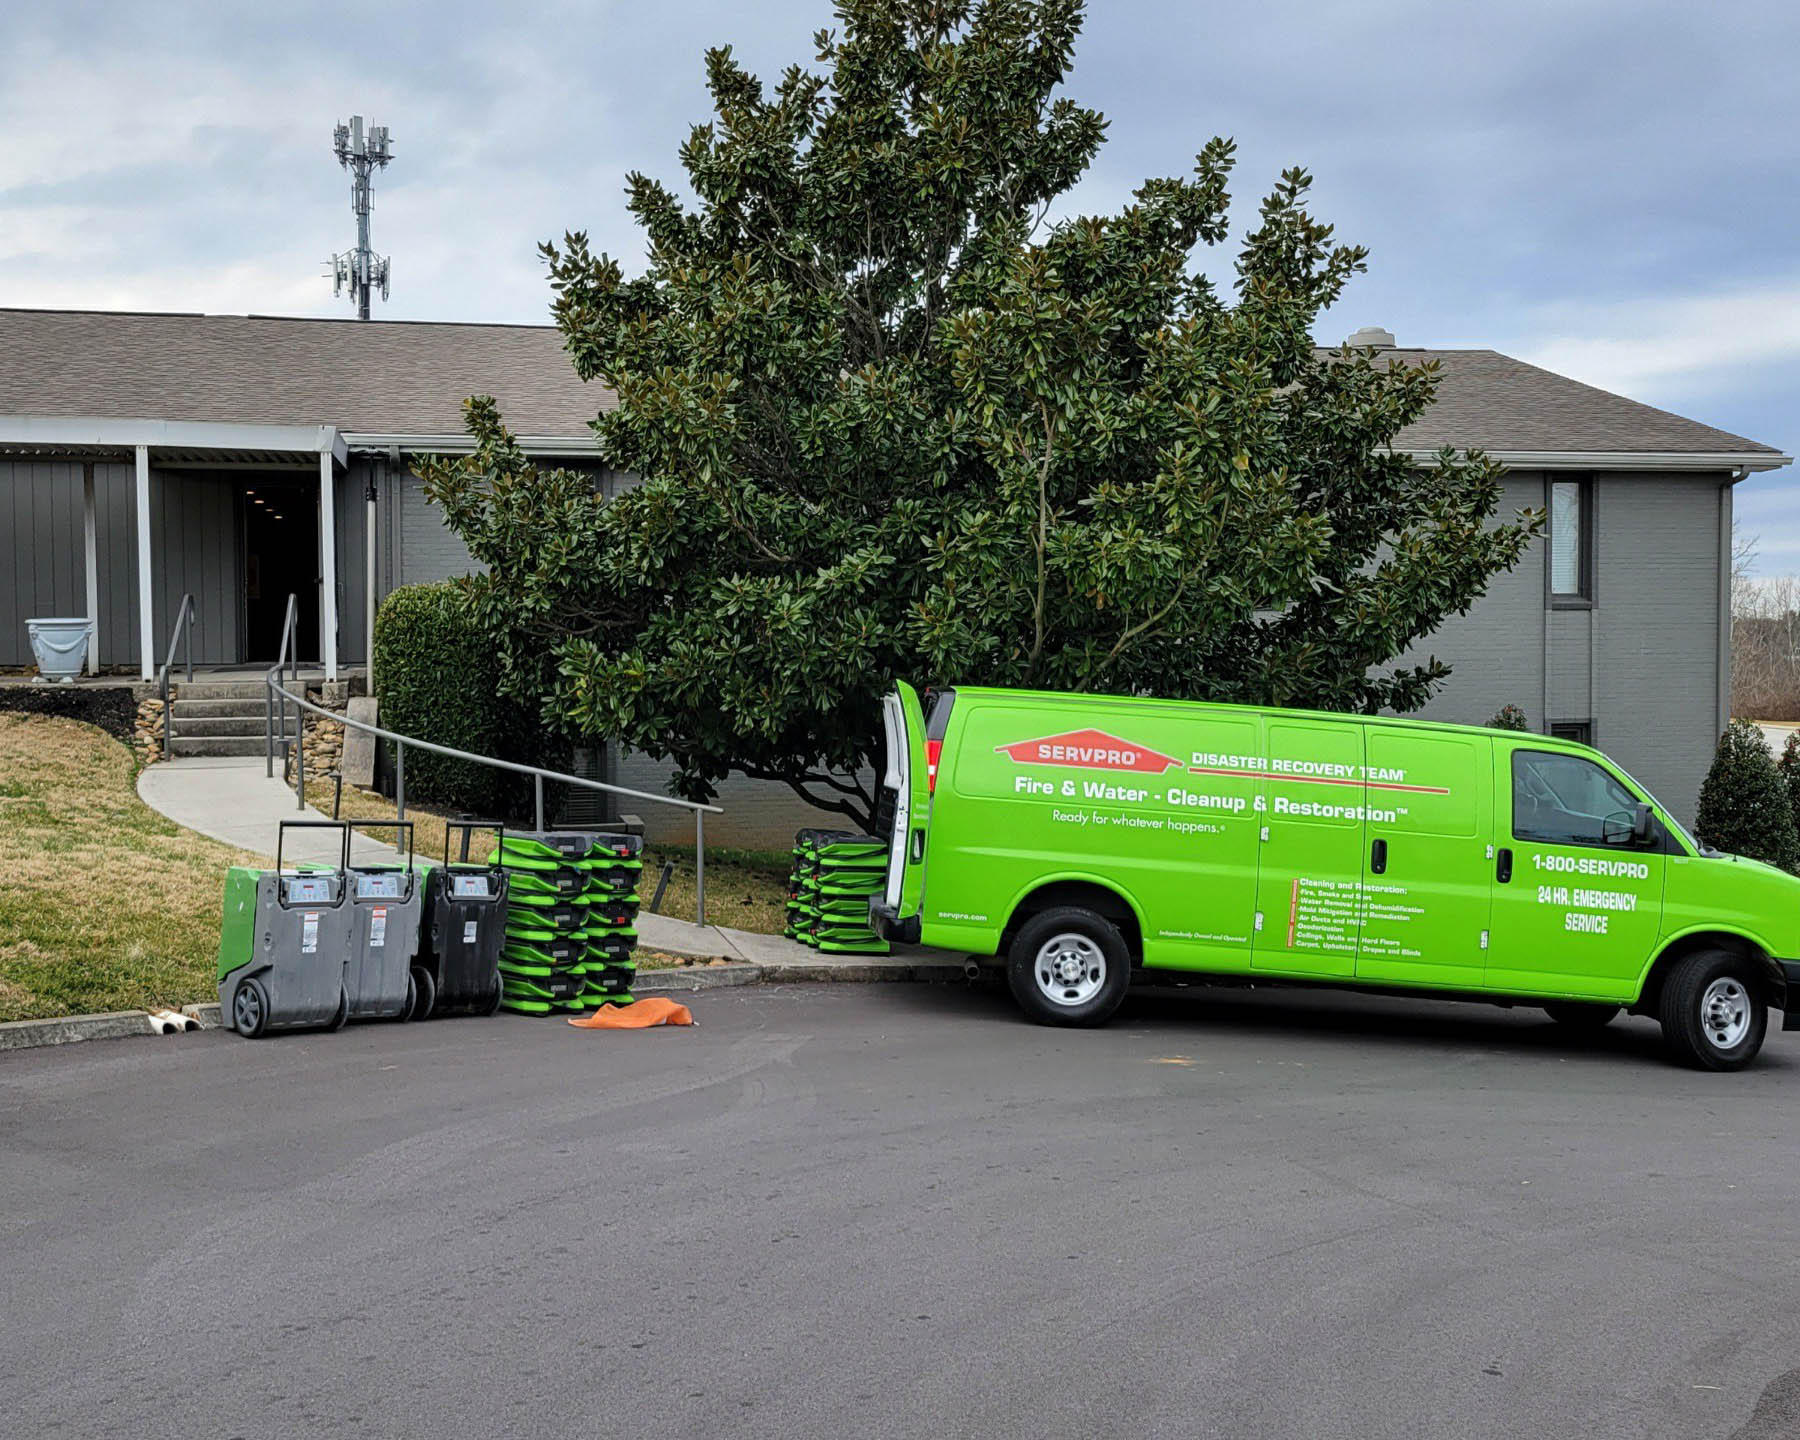 SERVPRO of Oak Ridge is prepared to handle any type of water, mold, or fire damage. Our 24/7 emergency services will ensure that you have a trusted team ready to help you. Give us a call today!